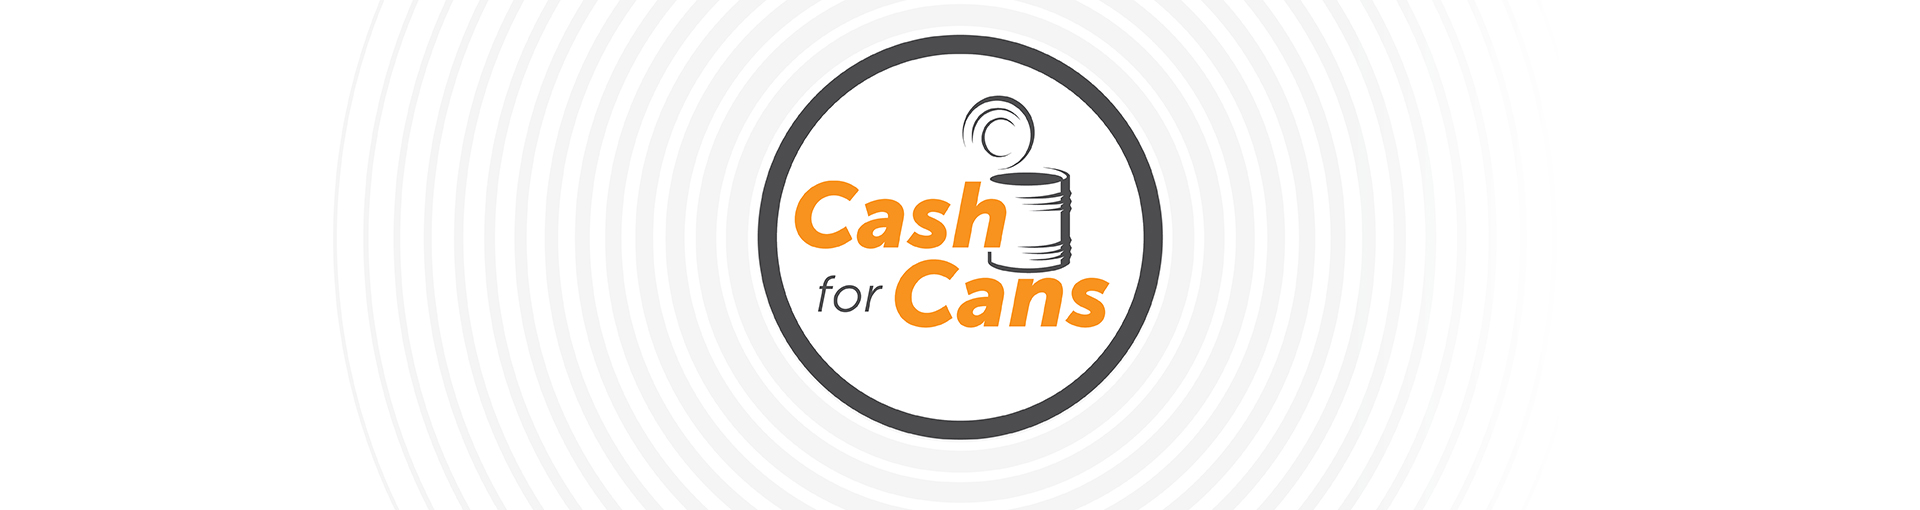 cash for cans banner